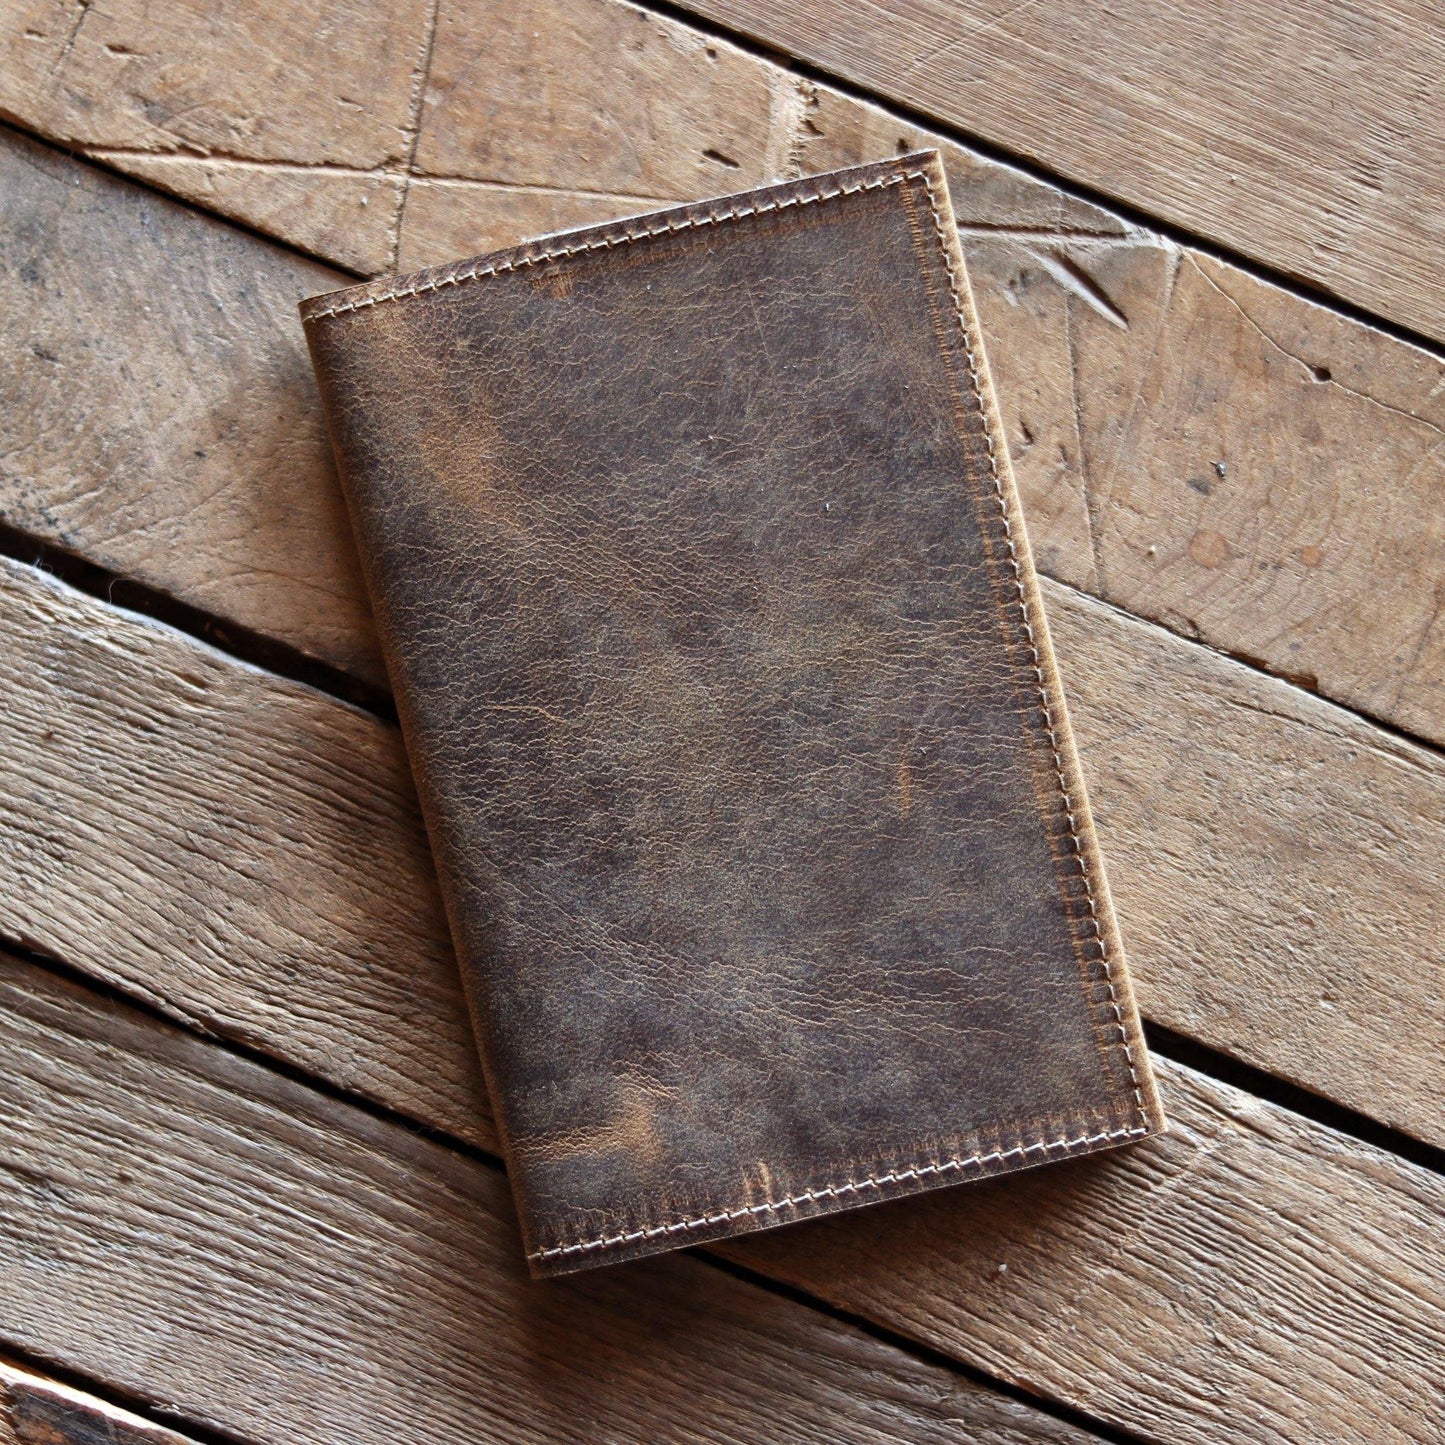 Exterior of leather notebook cover. Passport cover